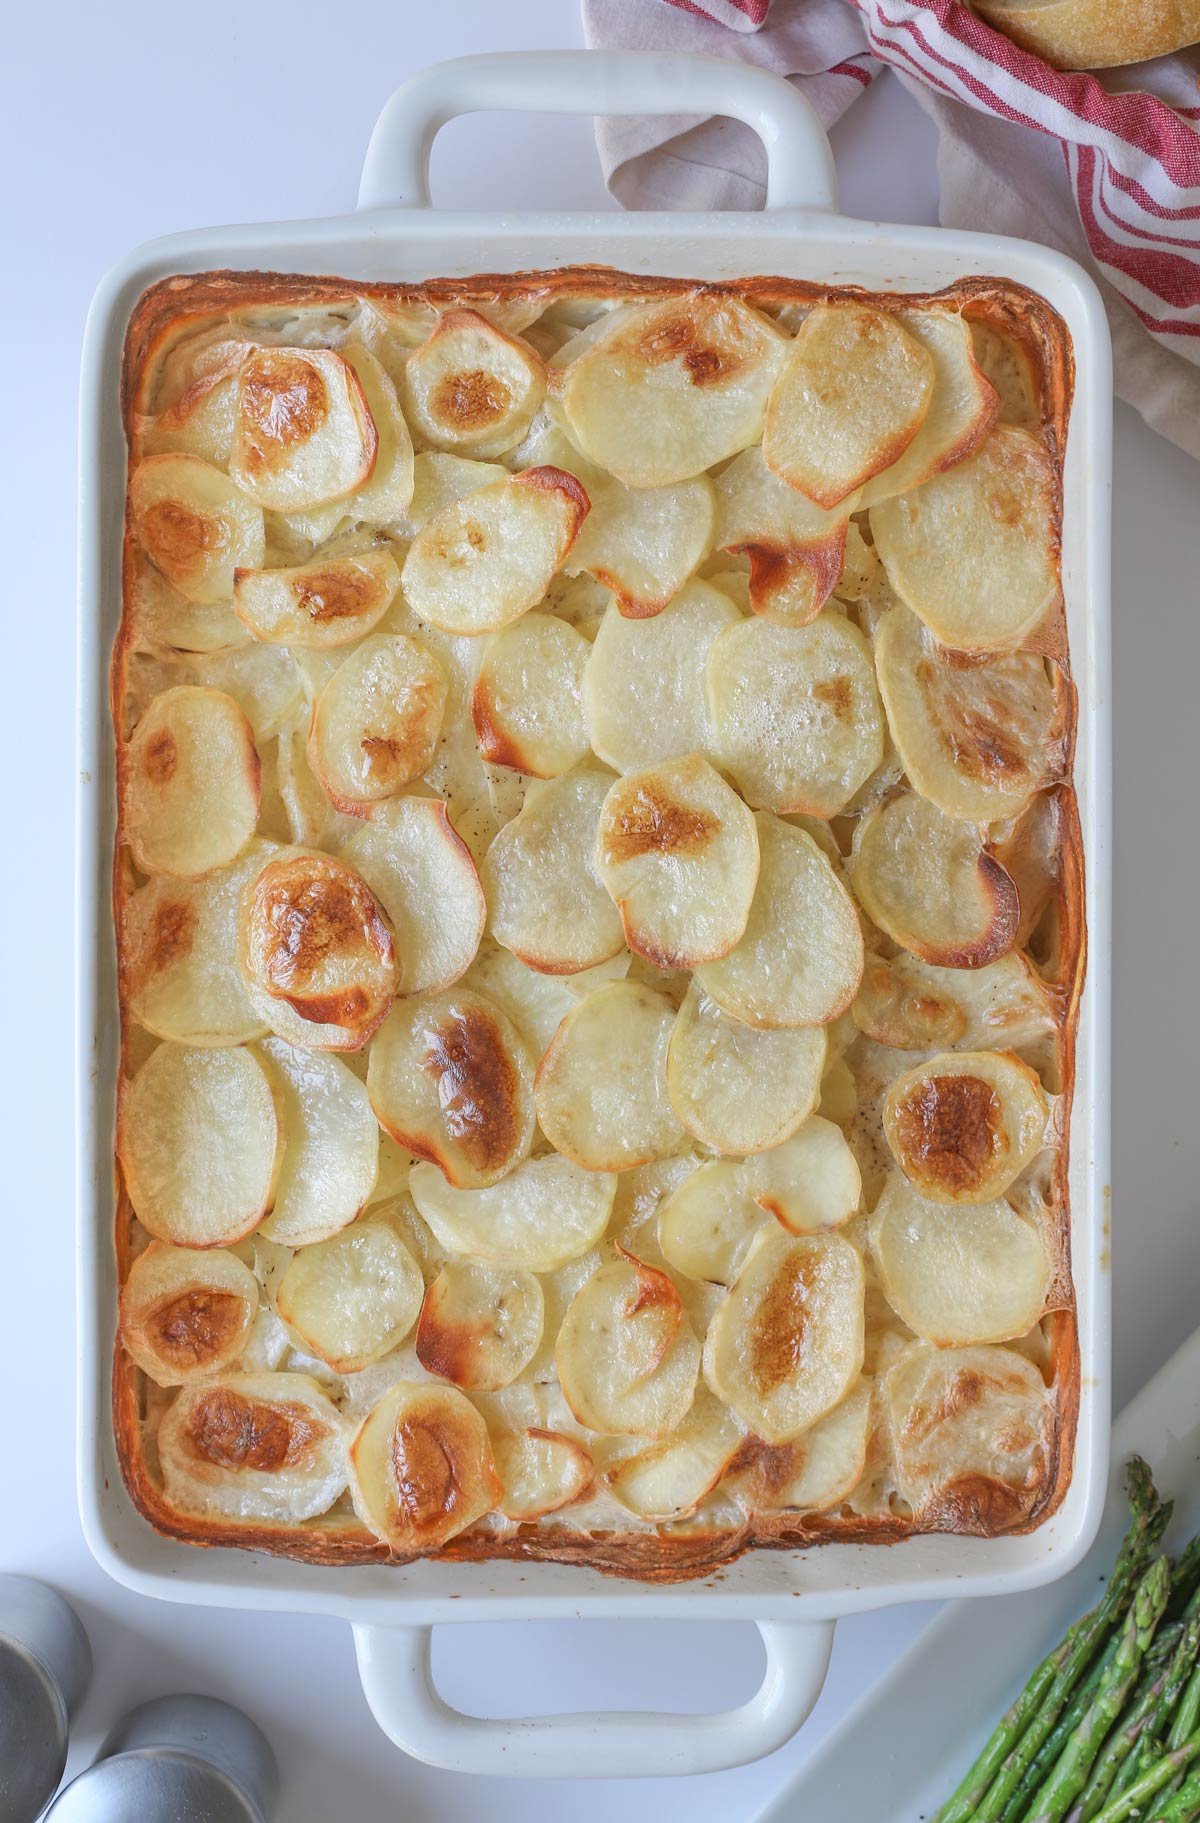 the finished scalloped potatoes in the baking dish.